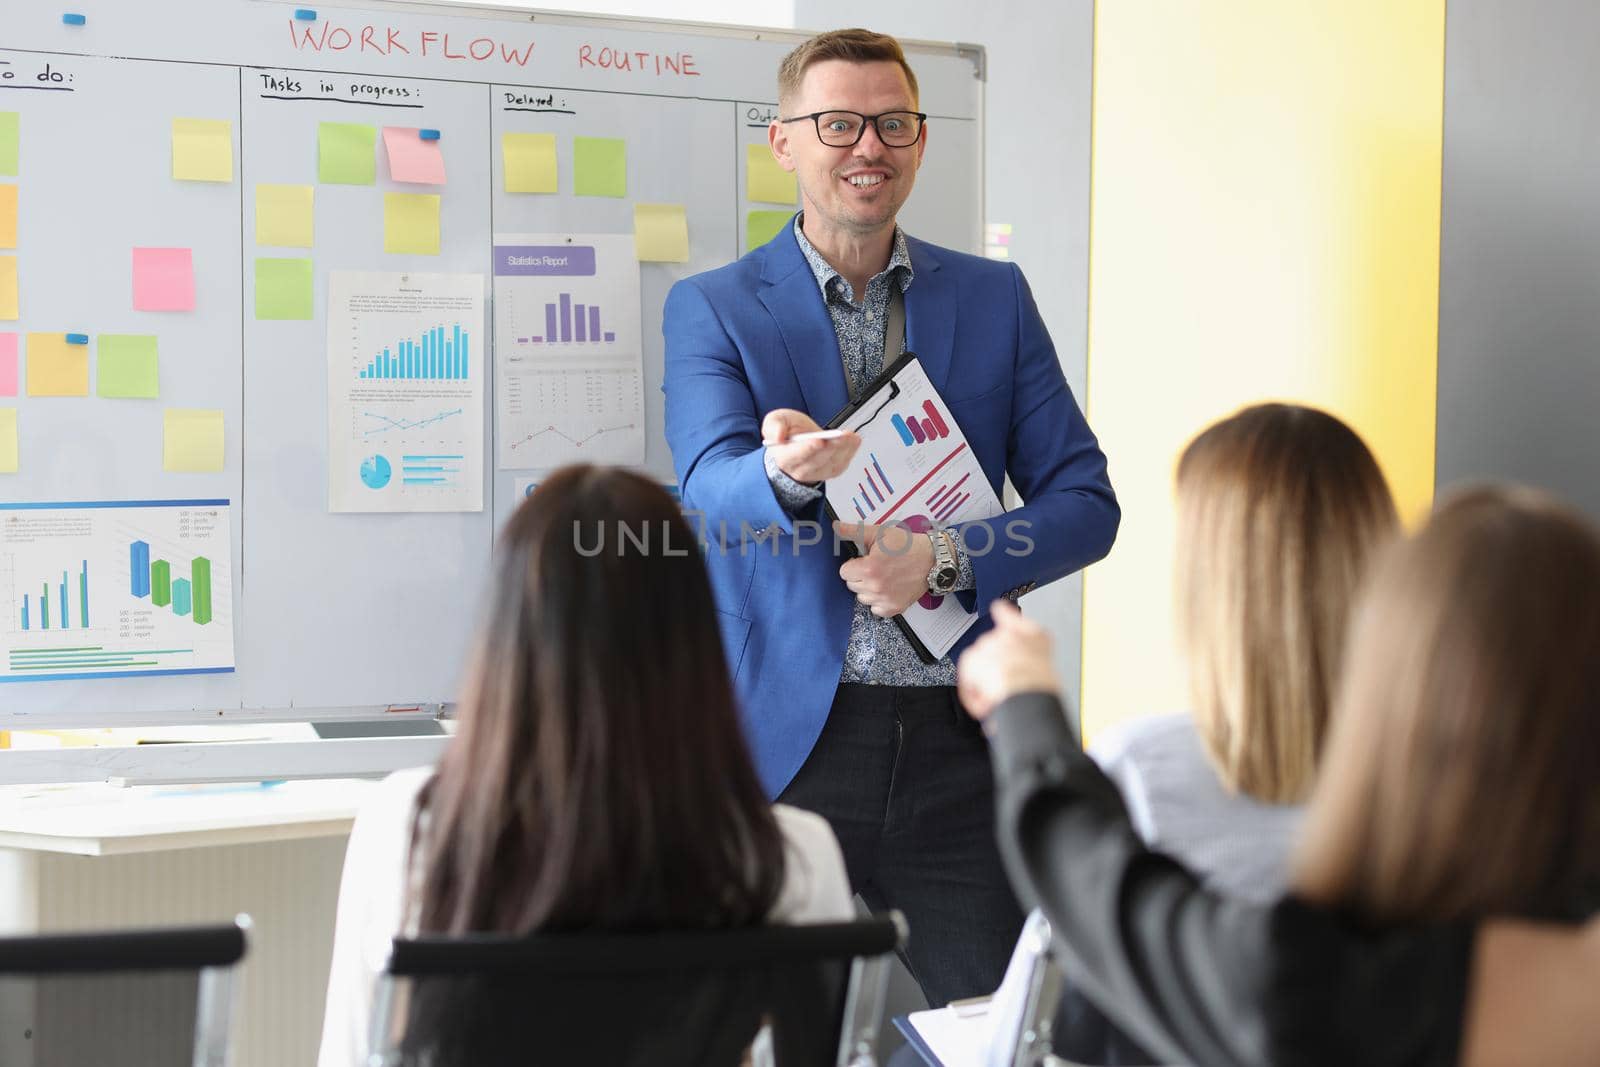 Portrait of enthusiastic businessman share future company goals, board with tasks, conference meeting. Business, strategy, teamwork, training, aim concept